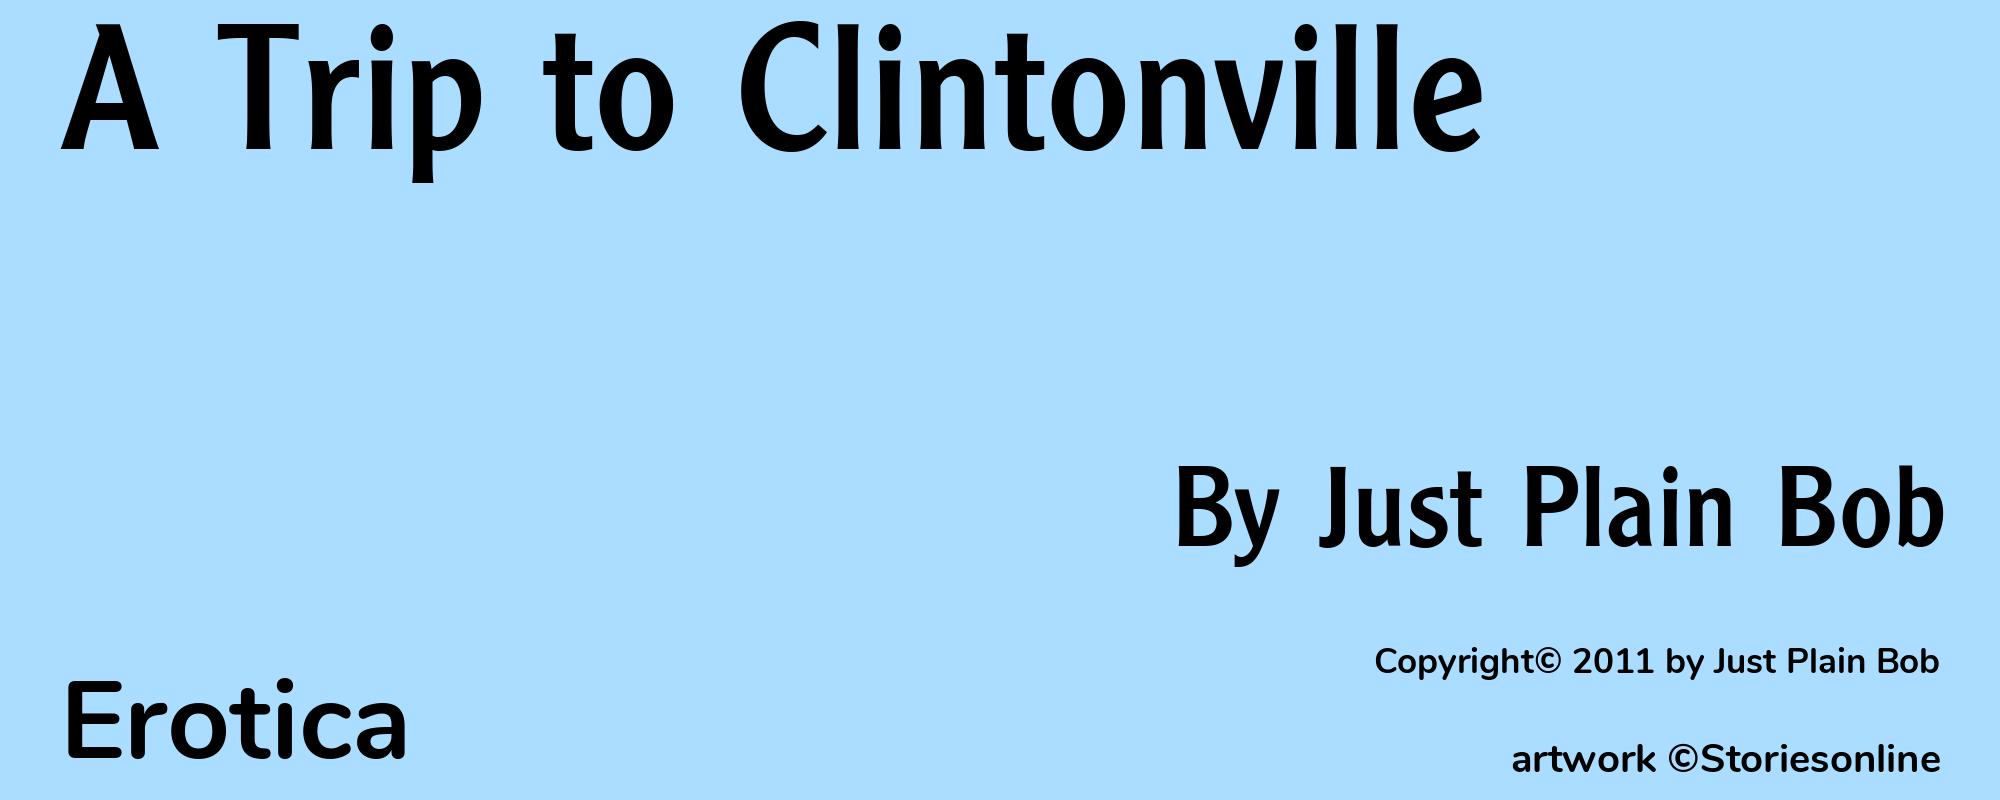 A Trip to Clintonville - Cover